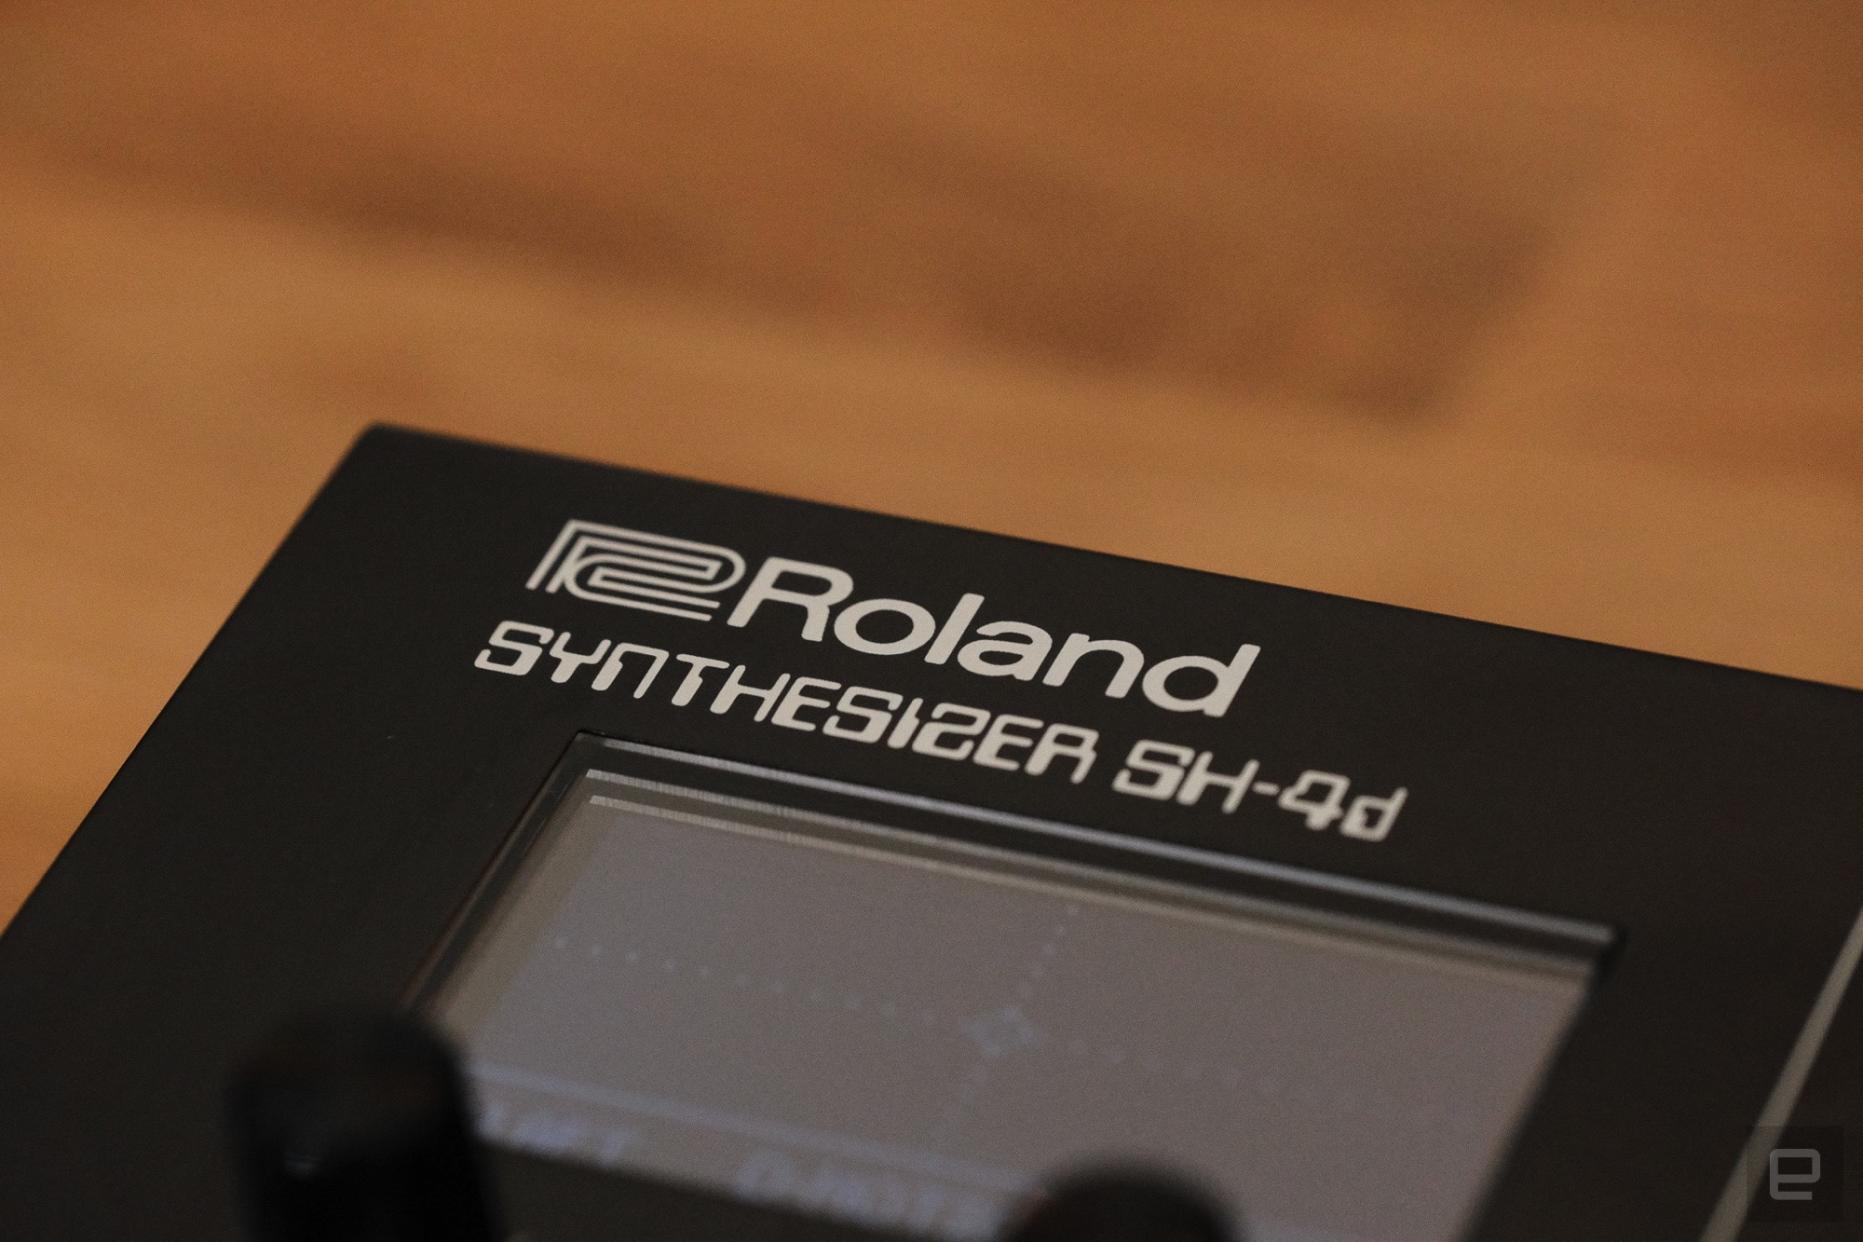 Another close up of the Roland SH-4d logo. 